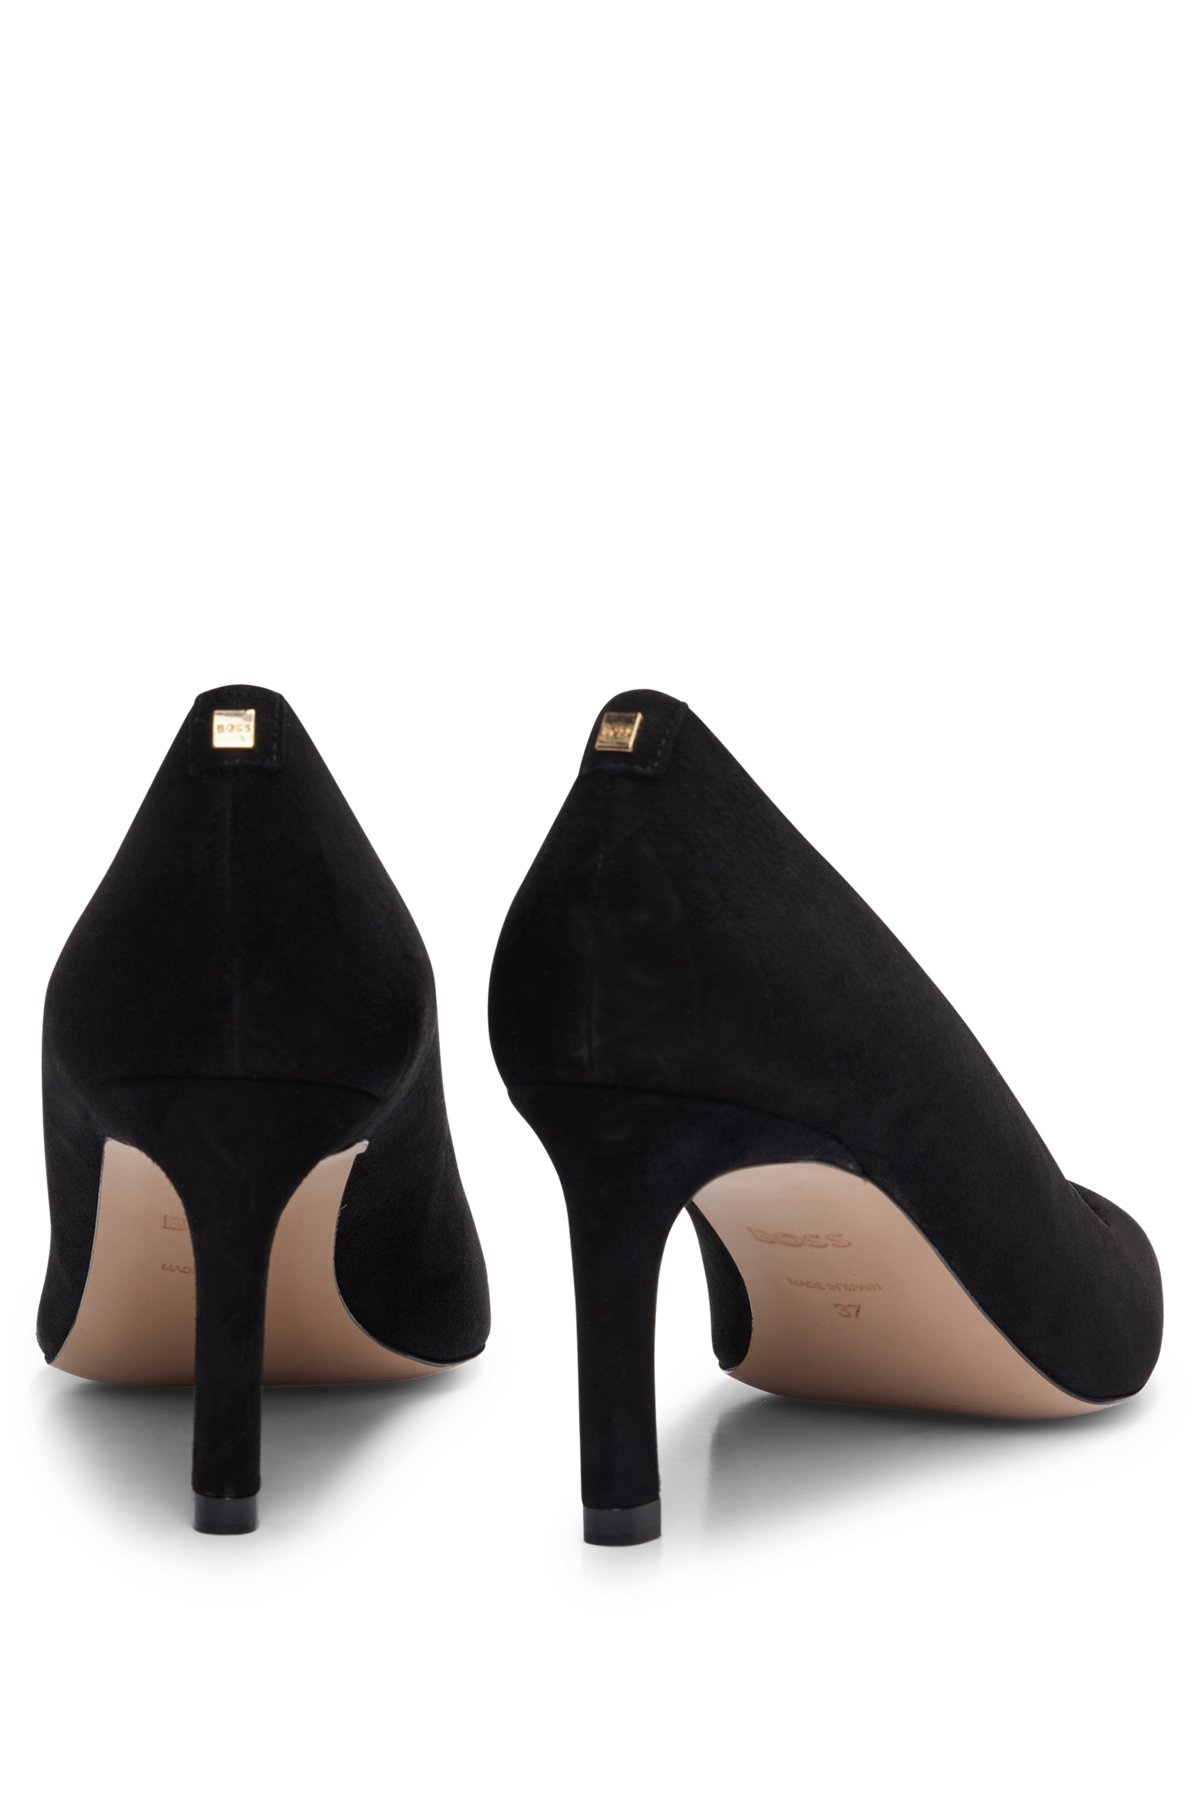 Suede pumps with pointed toe and branded stud, Black